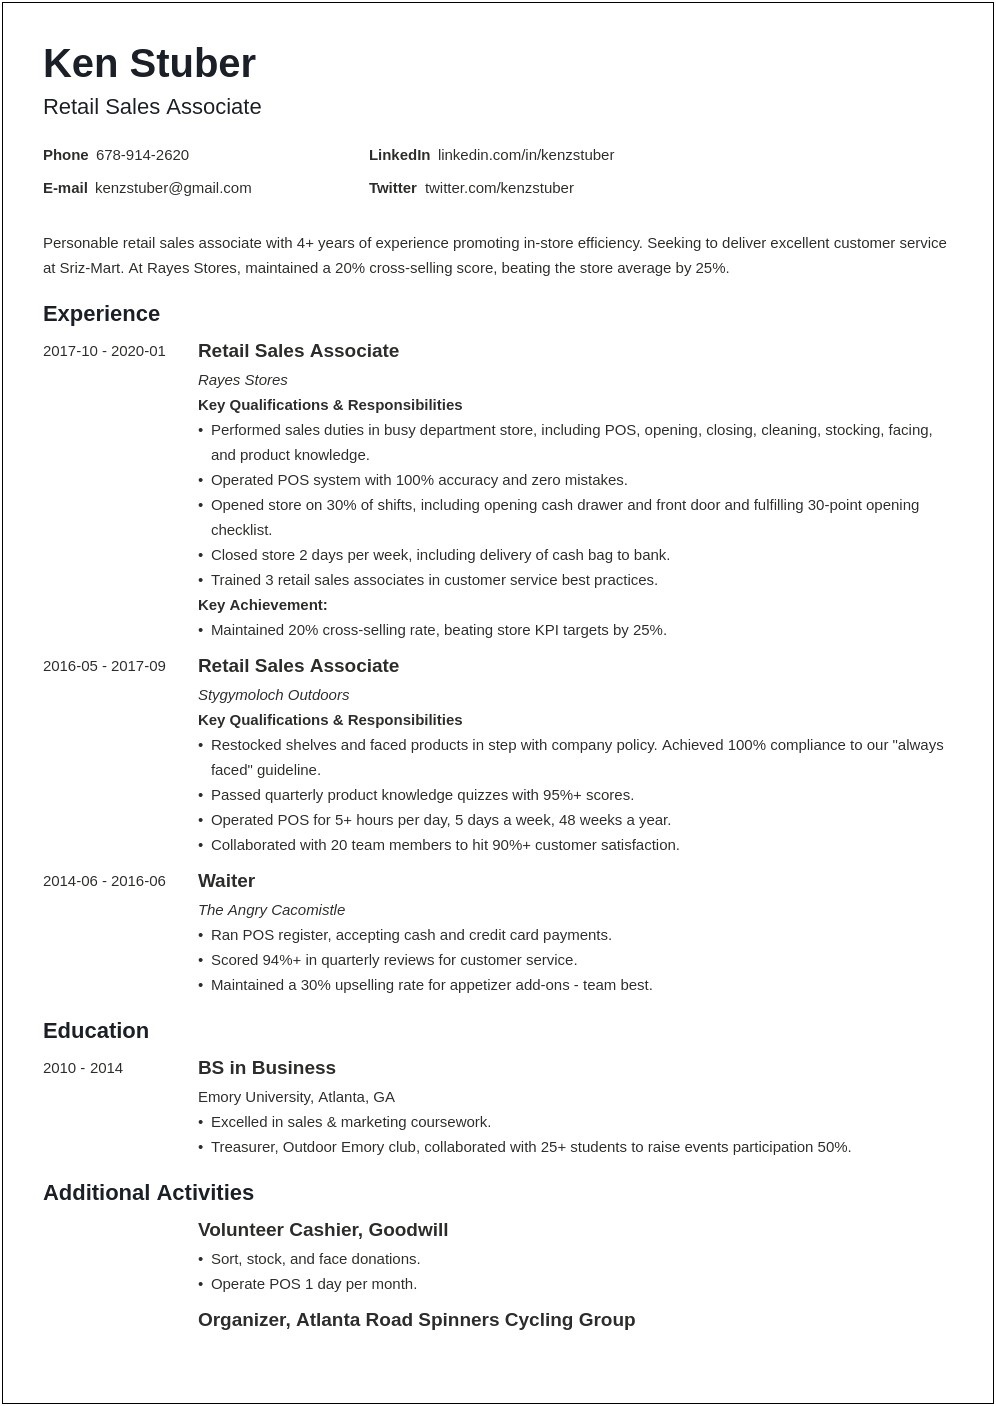 Best Summary For A Retail Resume